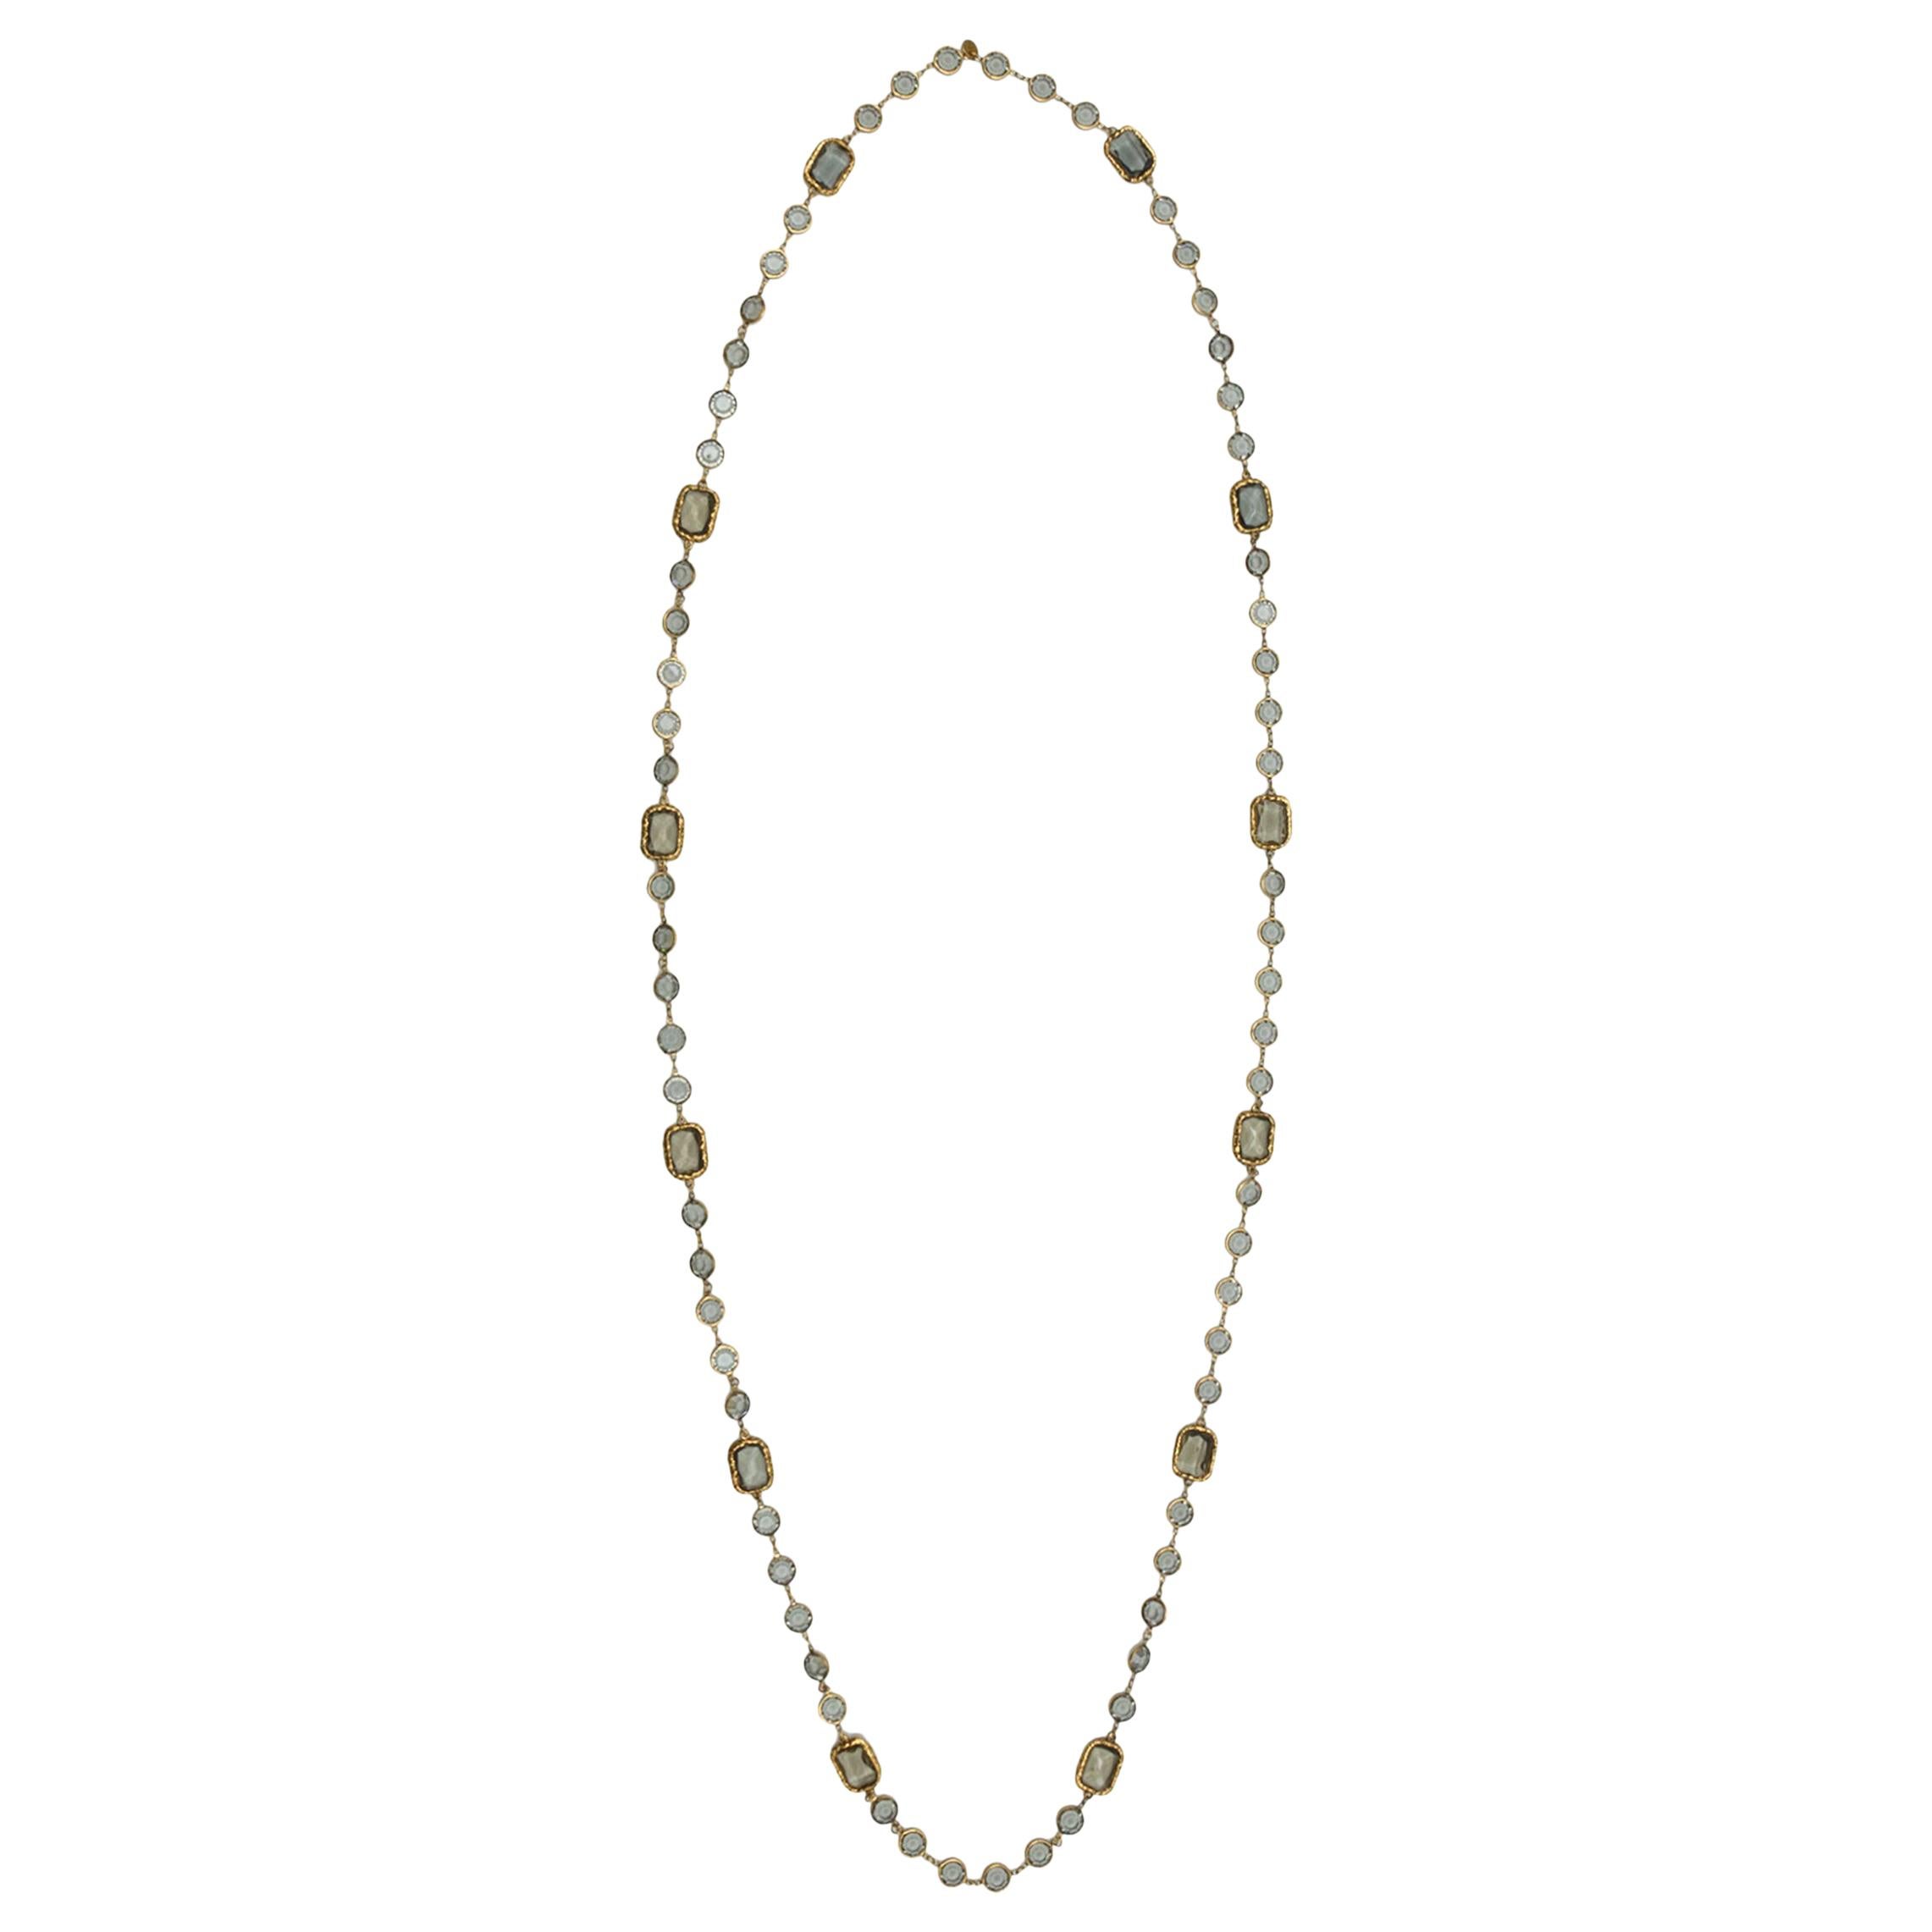 Chanel 1981 Gold-Tone Necklace